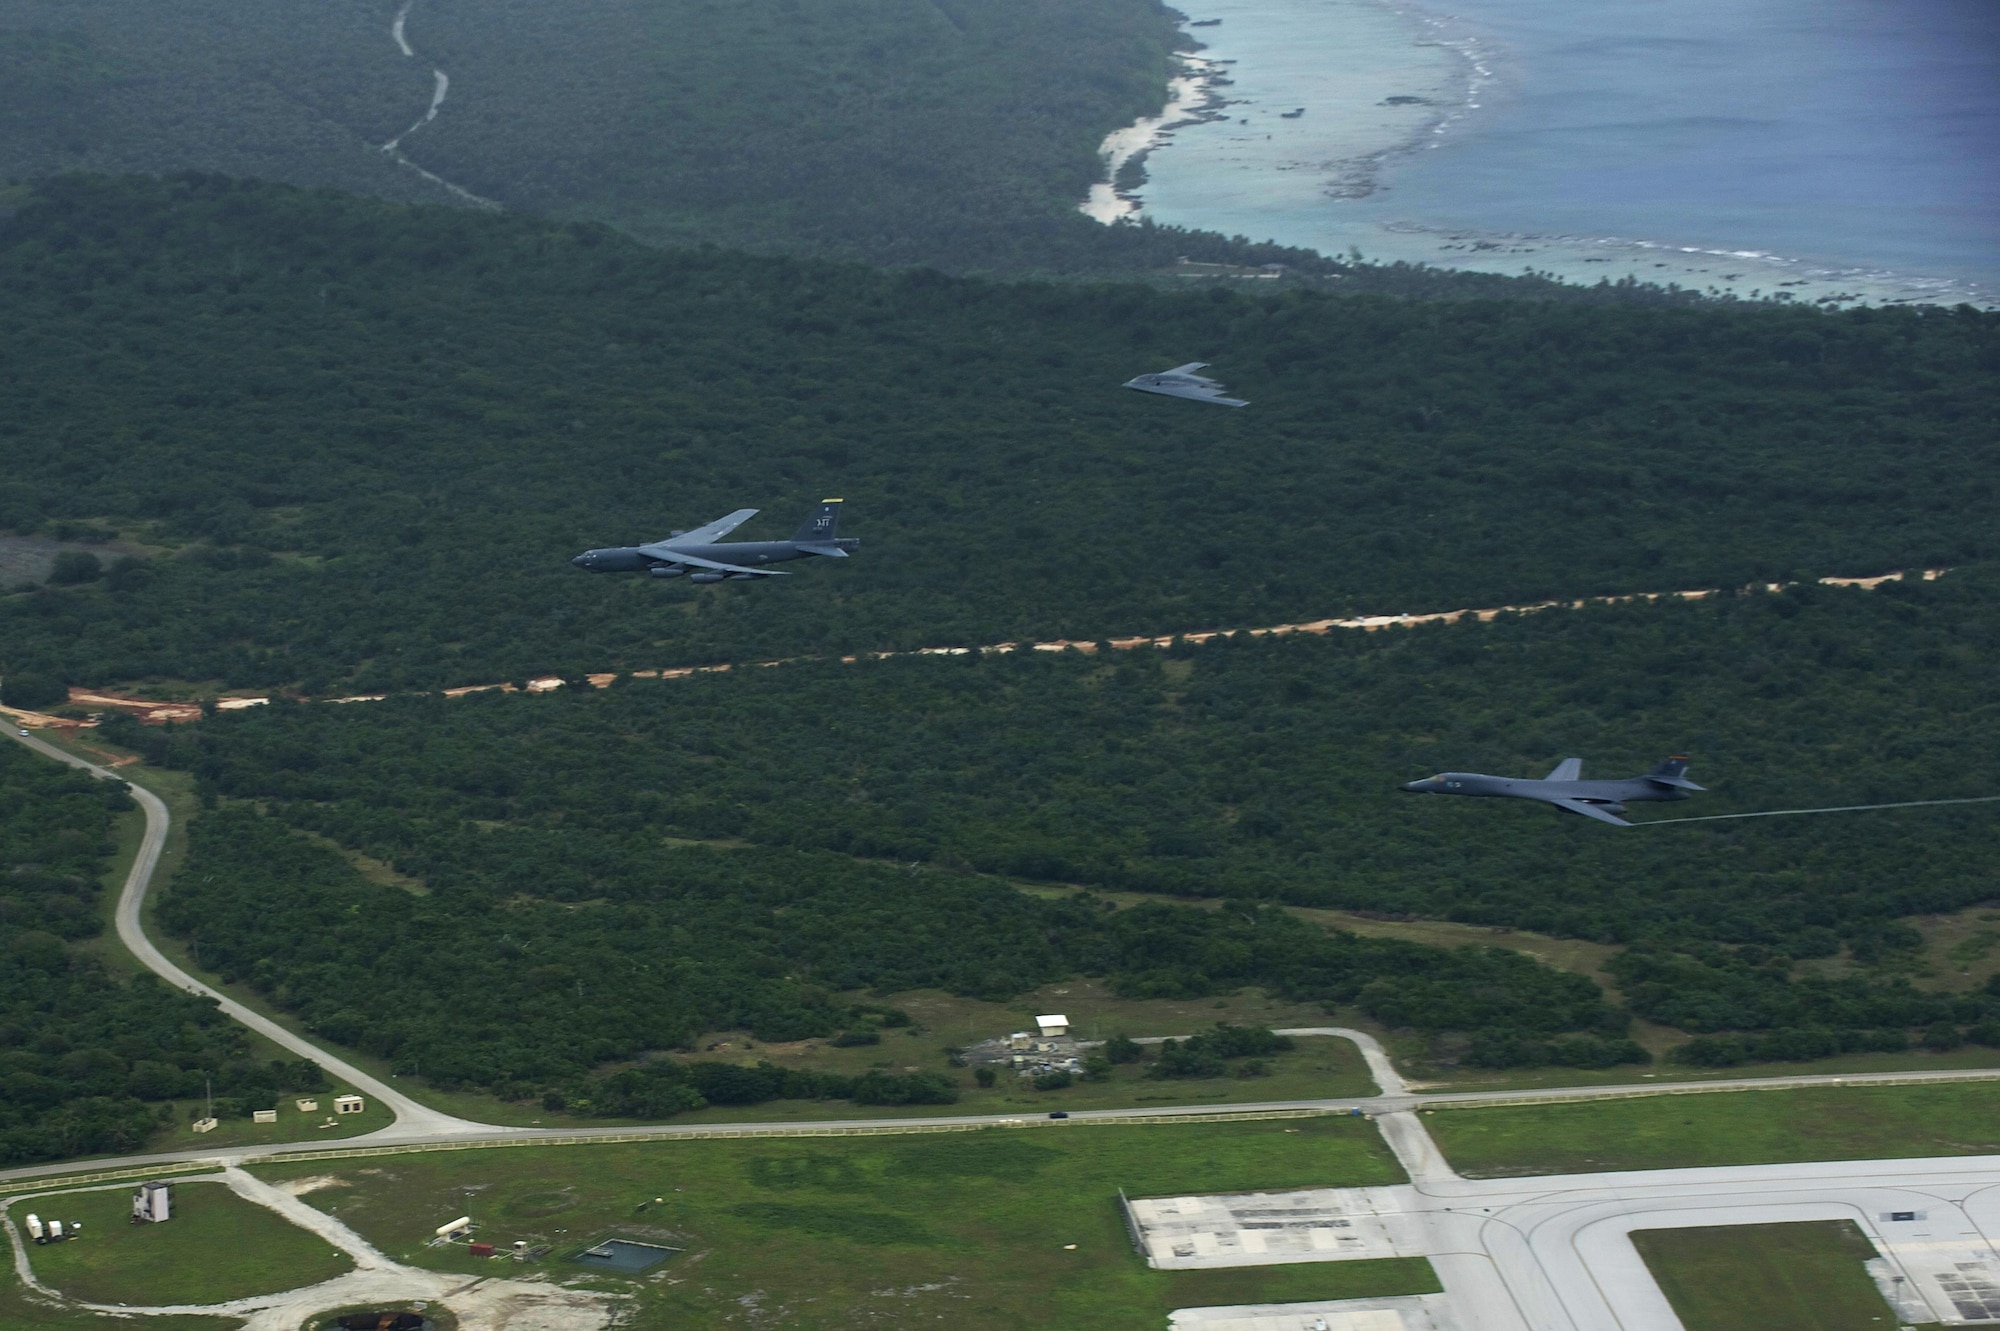 A U.S. Air Force B-52 Stratofortress, B-1 Lancer and B-2 Spirit launch from Andersen Air Force Base, Guam, for an integrated bomber operation Aug.17, 2016. This mission marks the first time in history that all three of Air Force Global Strike Command's strategic bomber aircraft are simultaneously conducting integrated operations in the U.S. Pacific Command area of operations. As of Aug. 15, the B-1 Lancer will be temporarily deployed to Guam in support of U.S. Pacific Command's Continuous Bomber Presence mission. (U.S. Air Force photo by Staff Sgt. Sandra Welch)